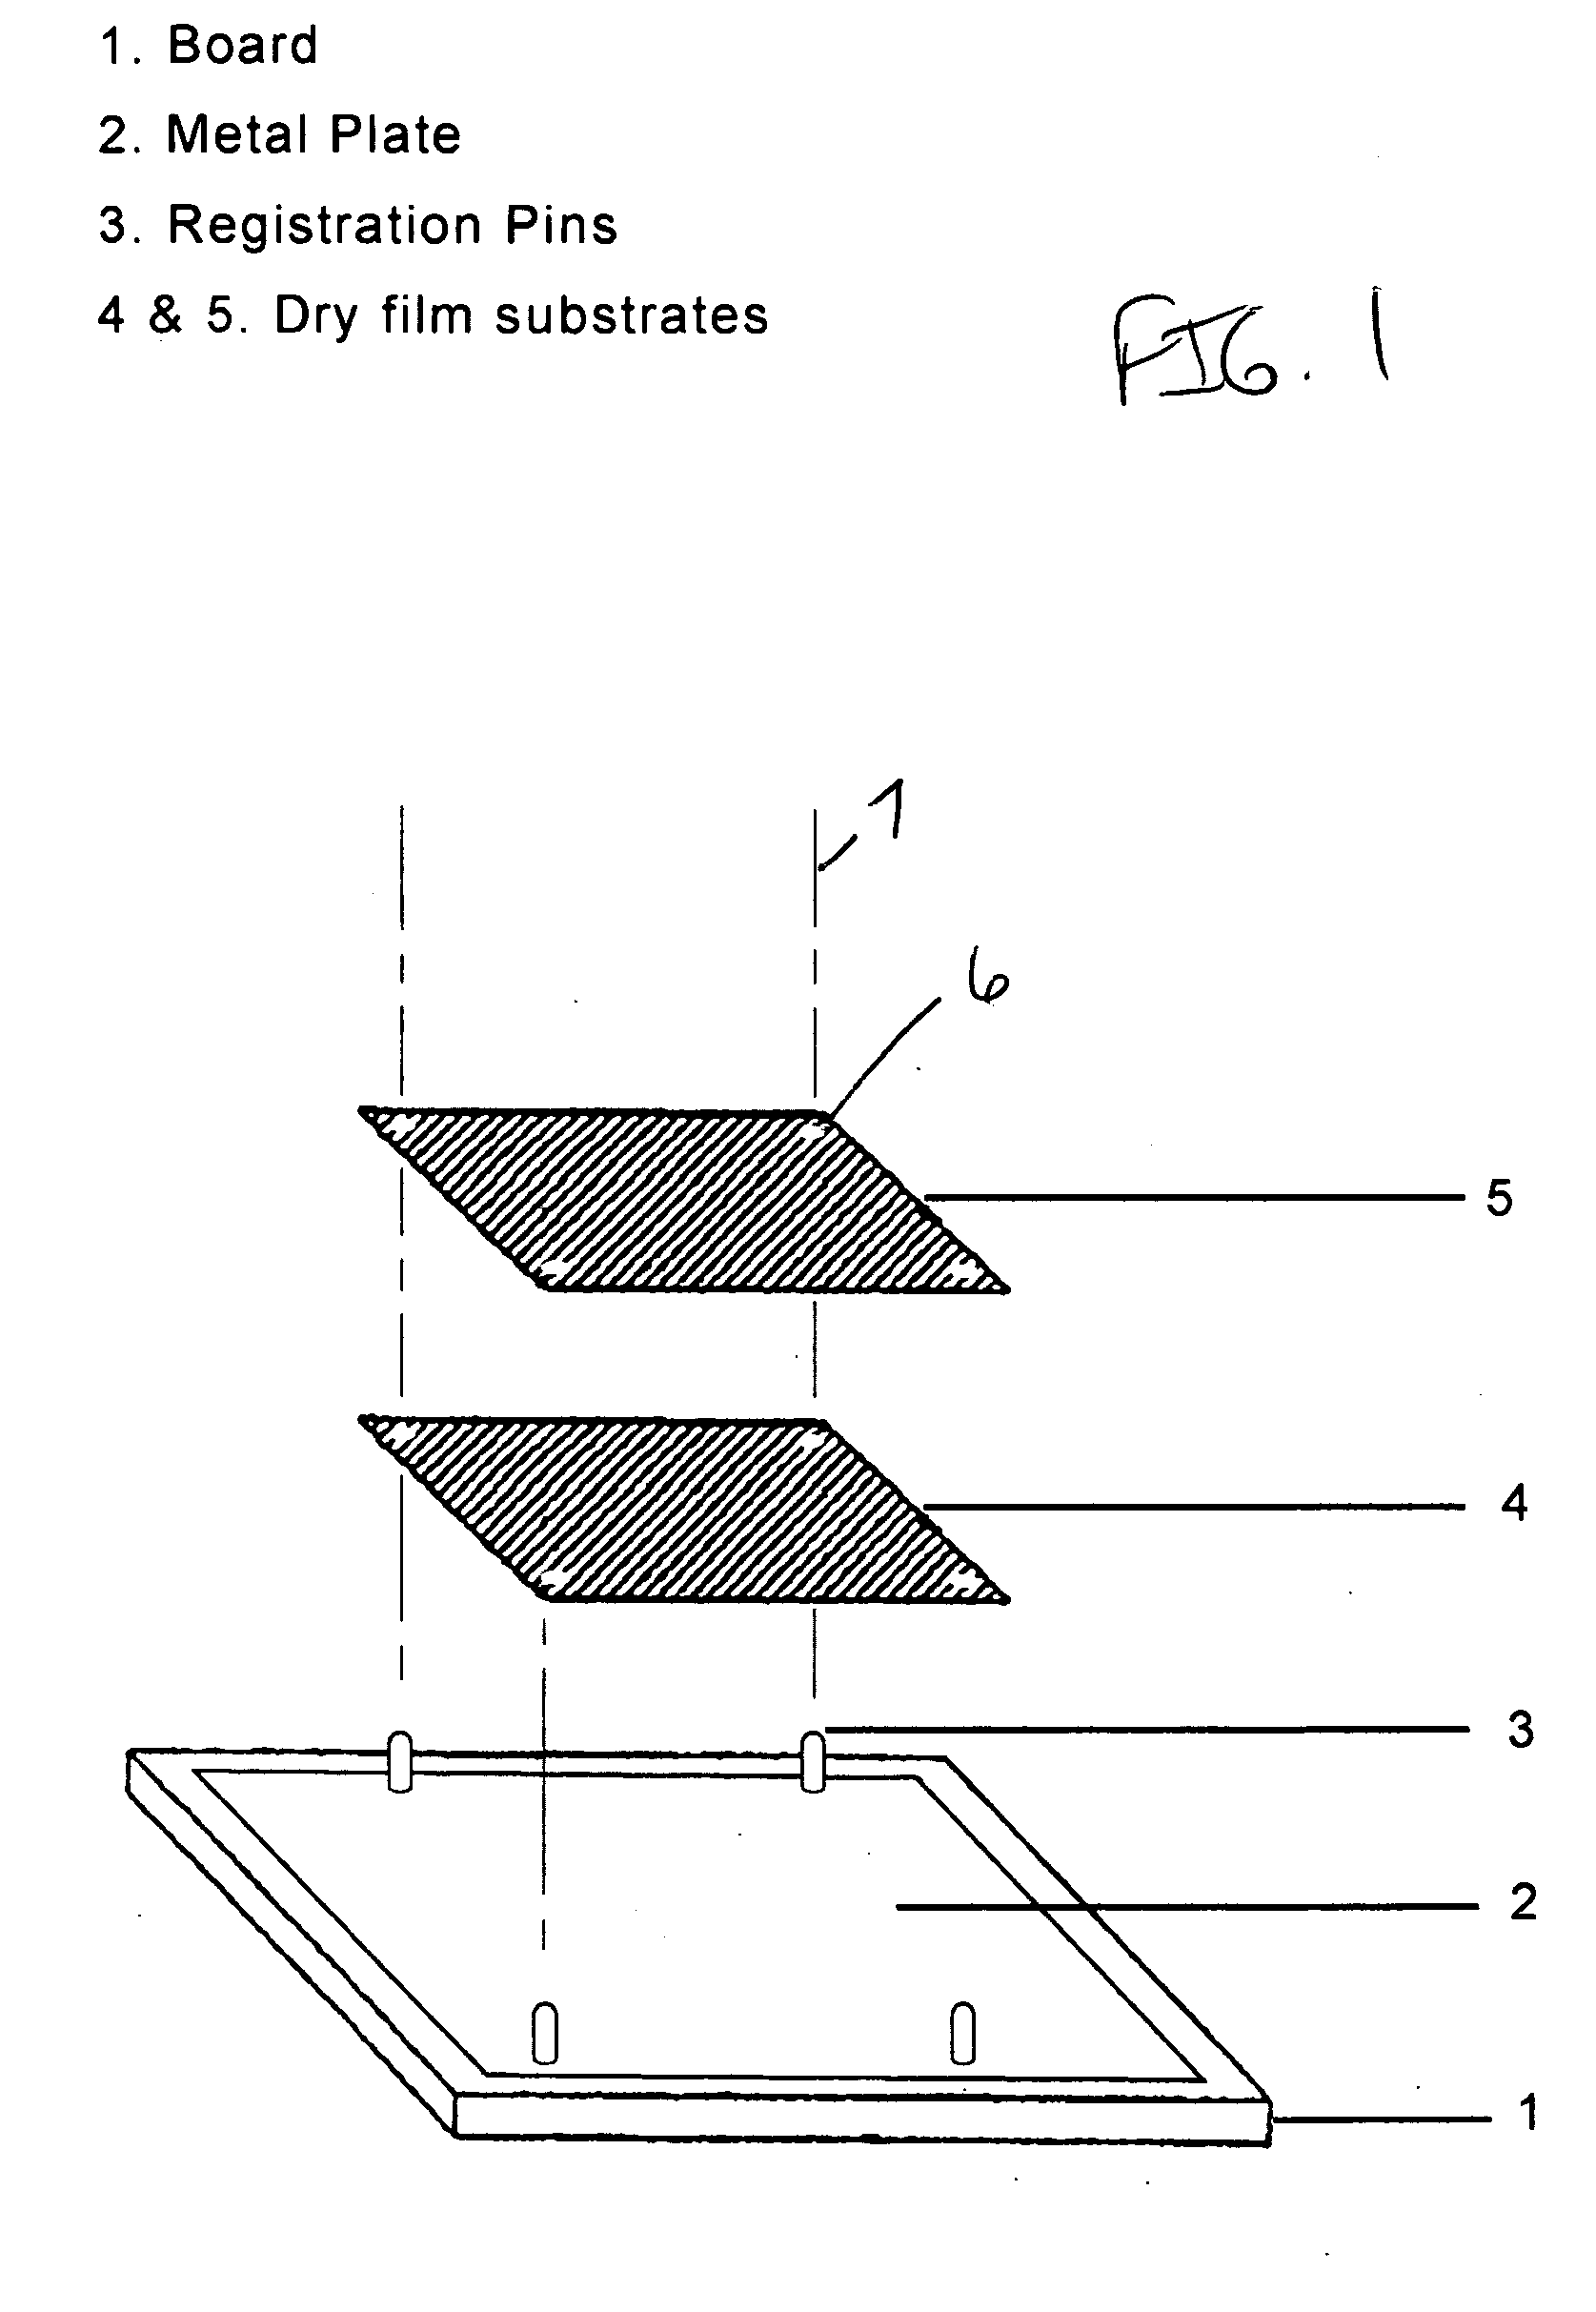 Photographic printing system and method for application of multiple masks in coloring refractory metals